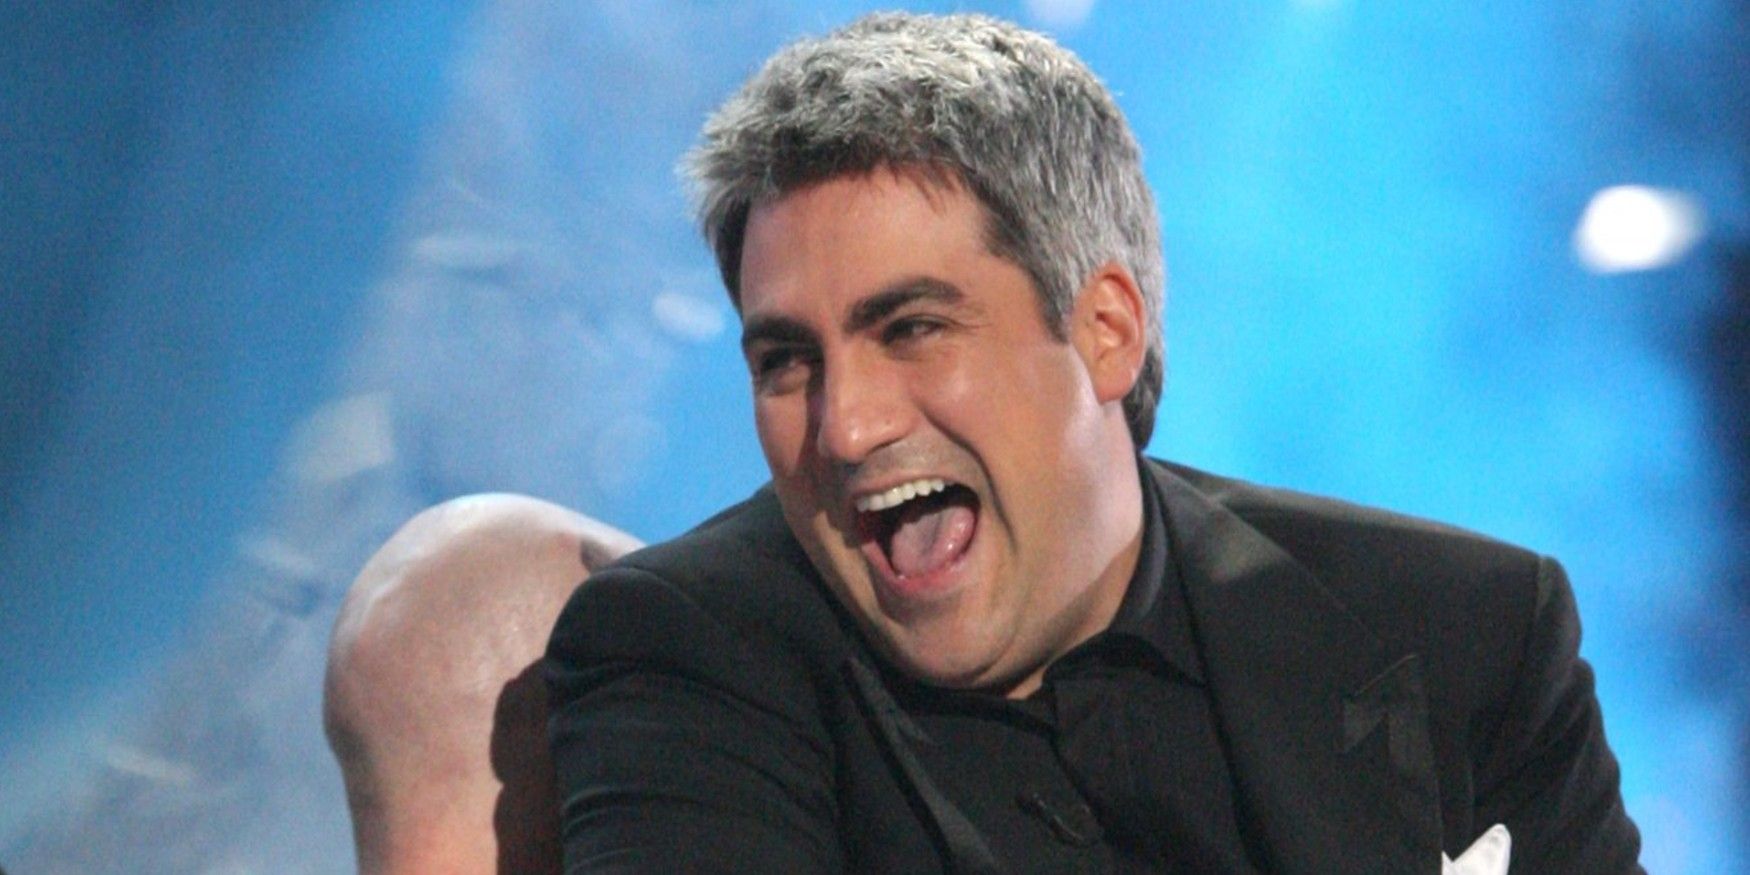 Taylor Hicks laughing on American Idol